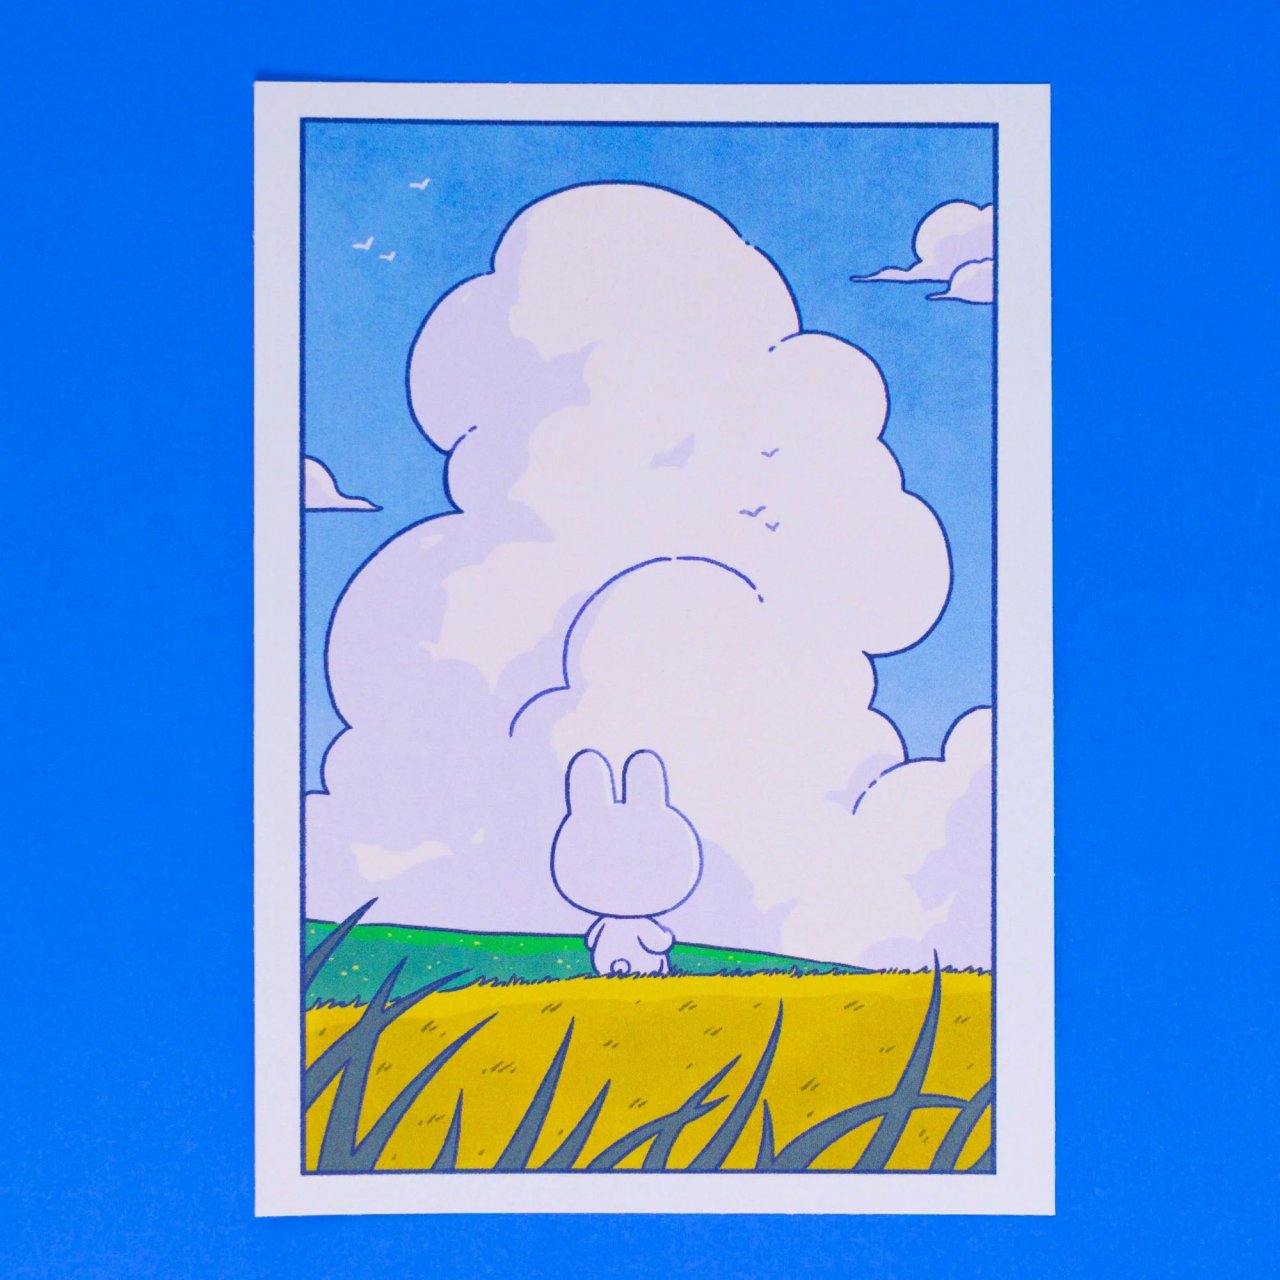 Art print showing the back of a bunny sitting in a field, looking at a big column of clouds.